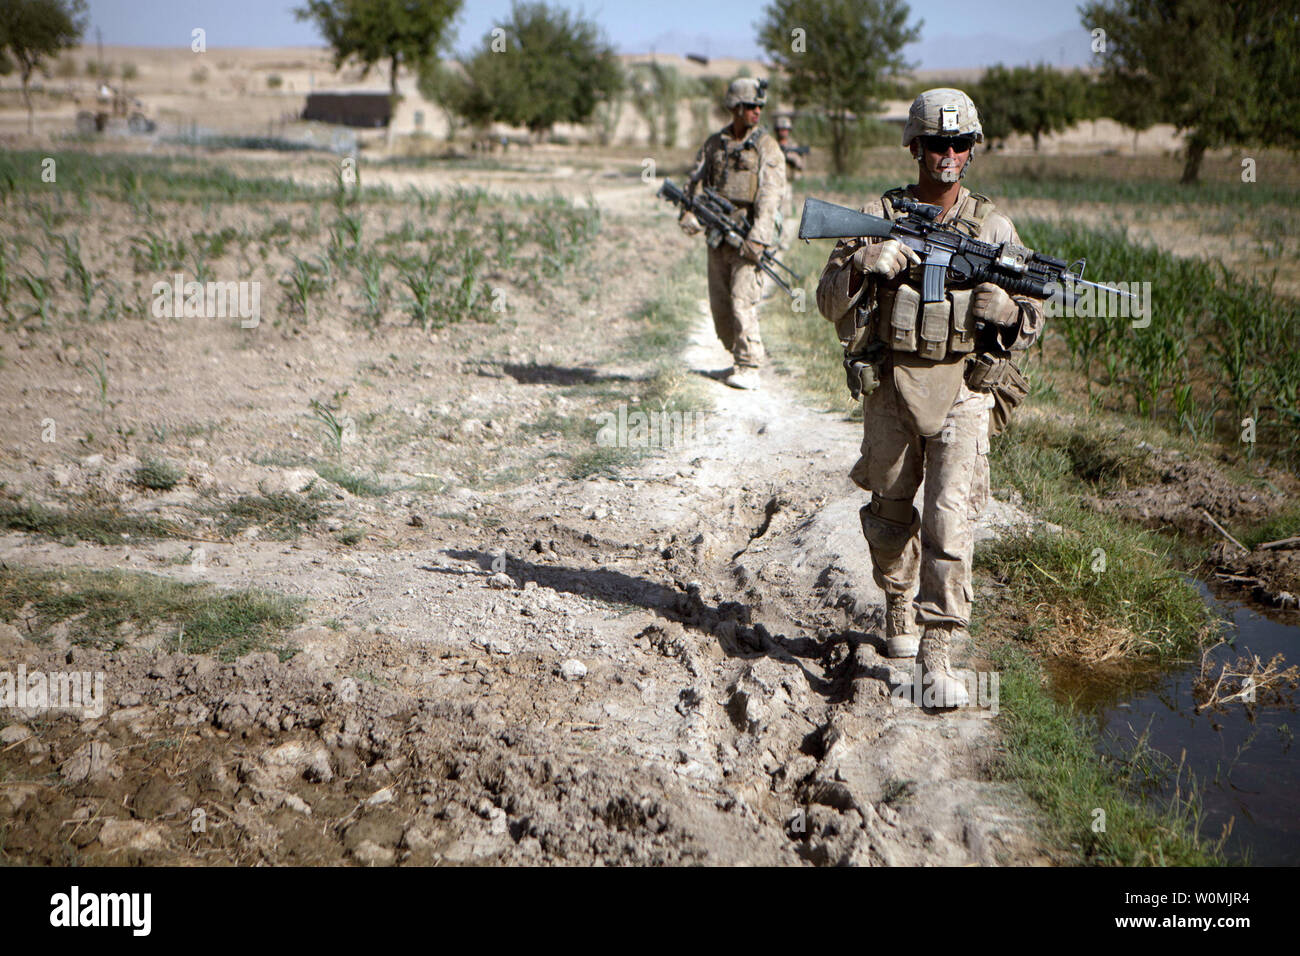 U.S. Marine Corps Cpl. Robert Dominguez, a team leader with Regimental Combat Team 8, 3rd Platoon, Bravo Company, 1st Battalion, 5th Marine Regiment, walks between cornfields while conducting a security patrol in Sangin, Afghanistan, on July 22, 2011.  Marines conducted patrols to suppress enemy activity and gain Afghan trust.    UPI/Kowshon Ye/USMC Stock Photo